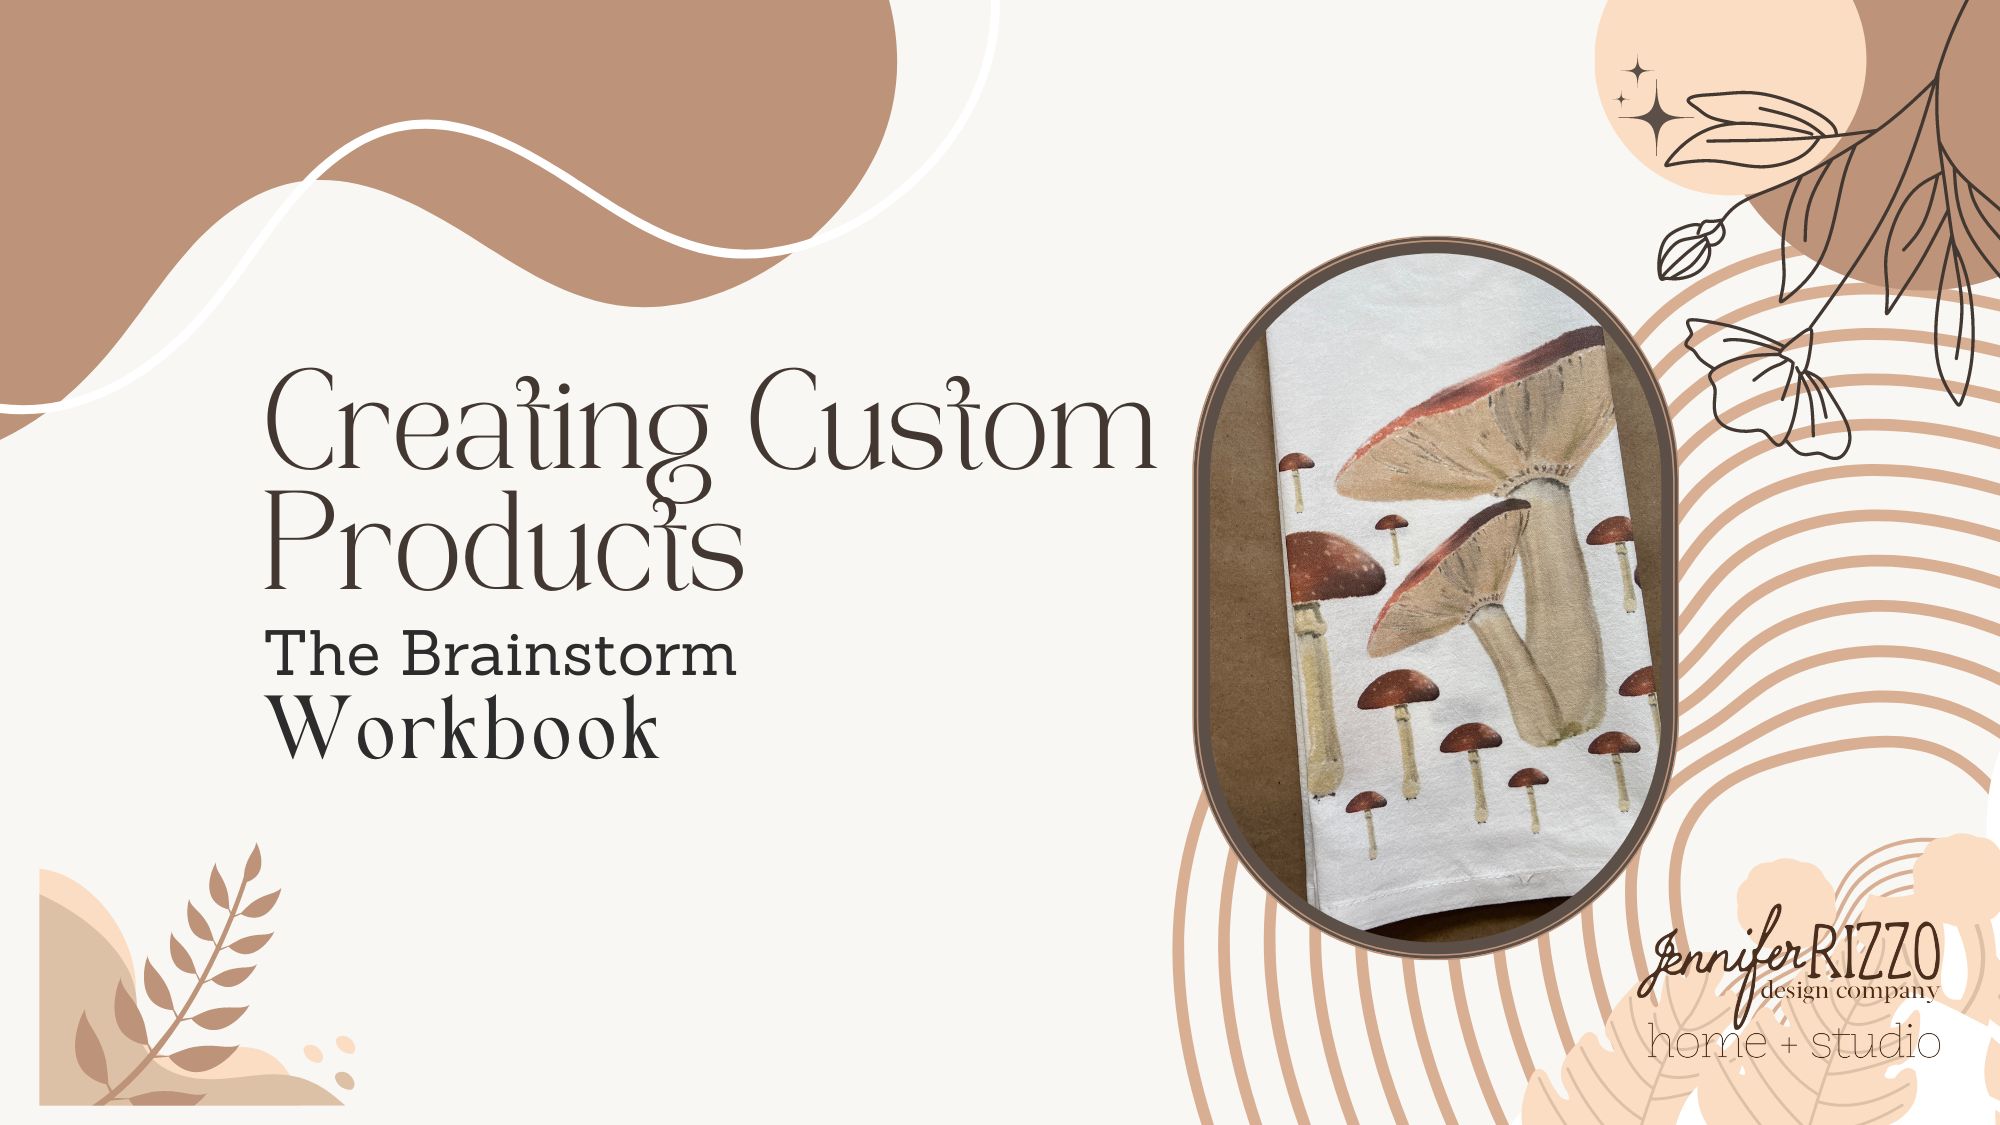 Cover with graphics of creating custom products the brainstorm workbook with swirls and handdrawn items and a towel with mushrooms on it